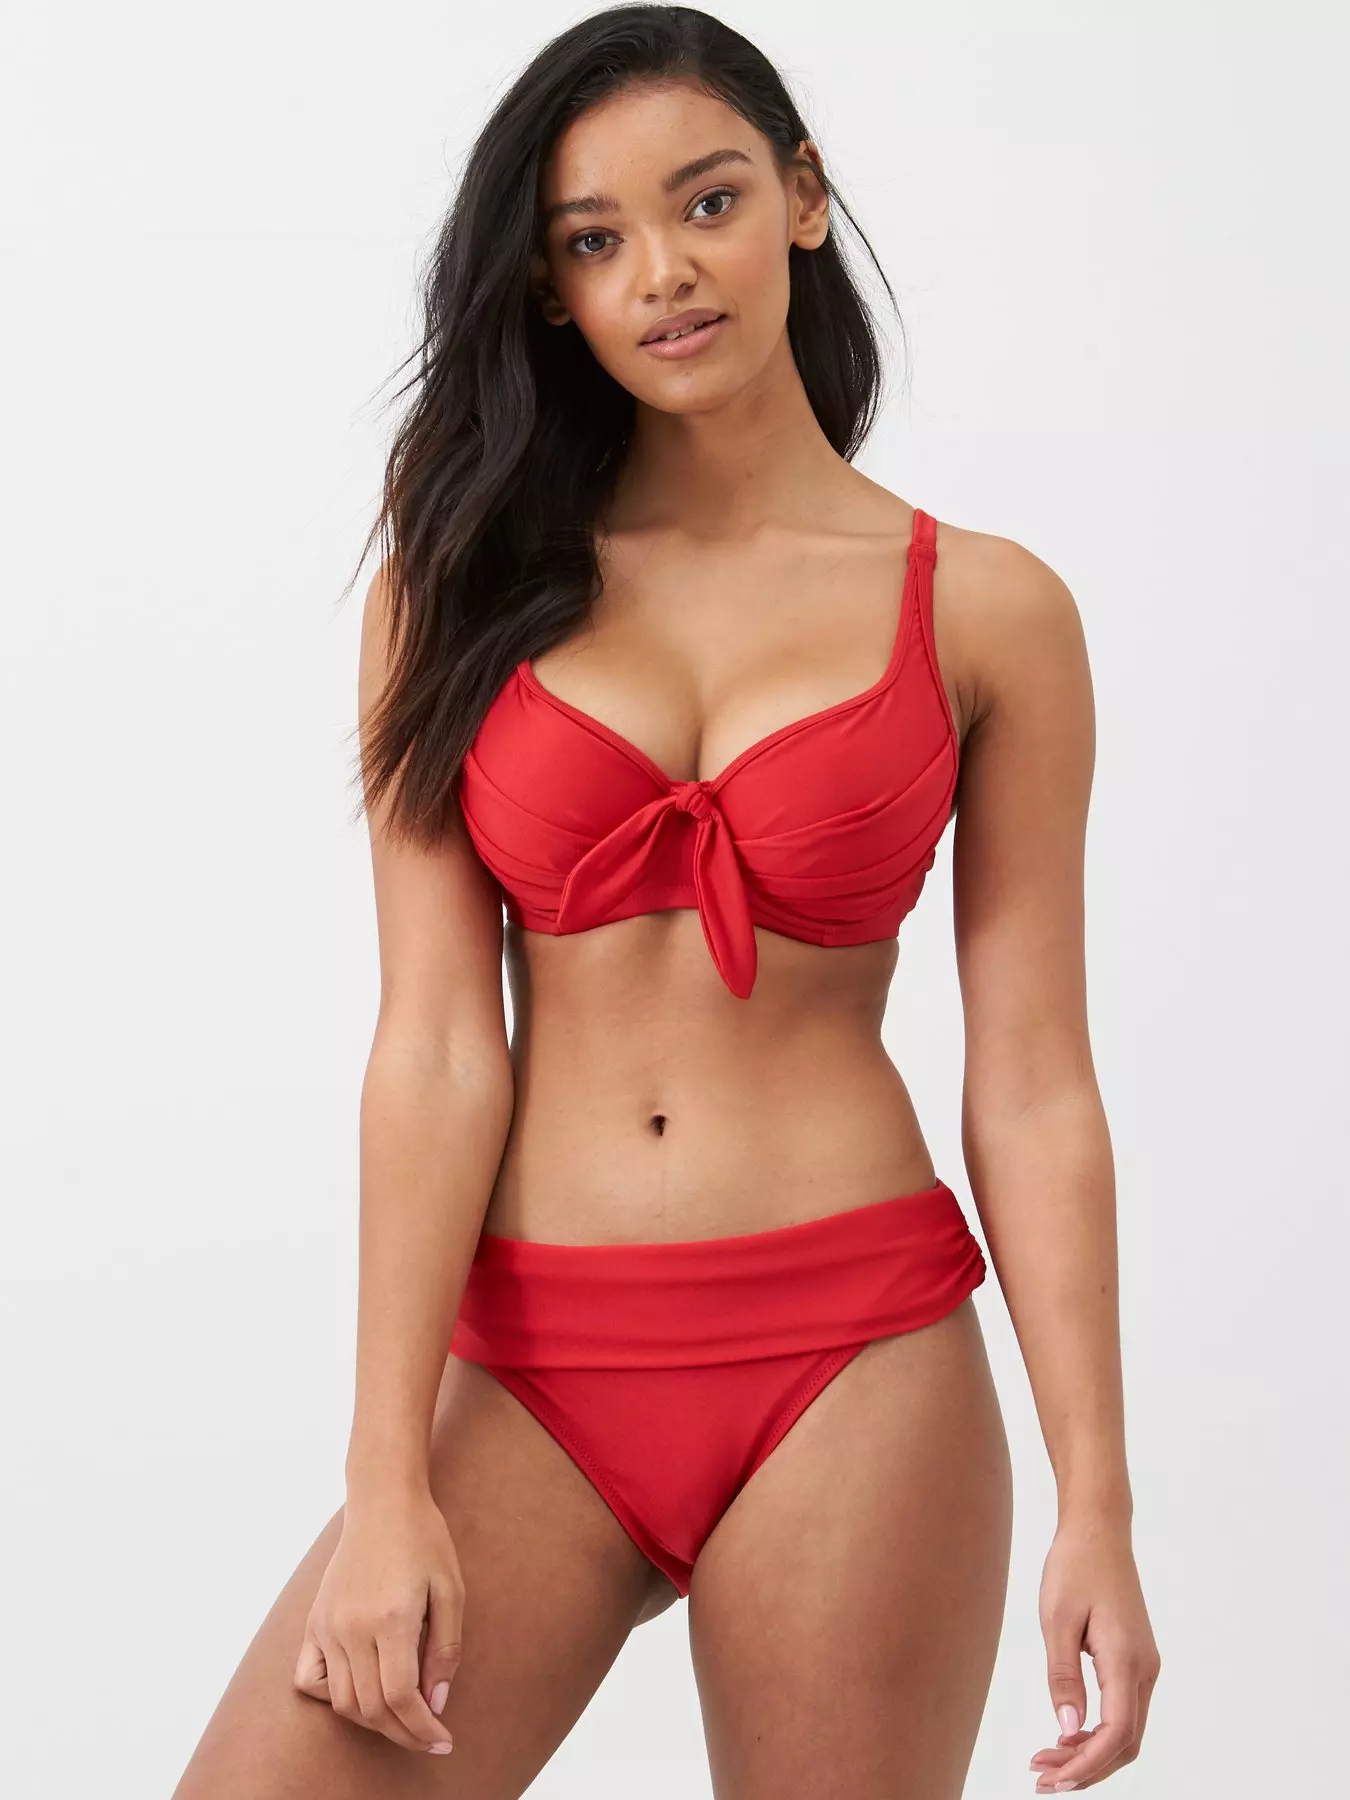 Pour Moi Horizon Super High Waisted Brief Swim Bottom in Red FINAL SALE  NORMALLY $49.99 NOW - Busted Bra Shop